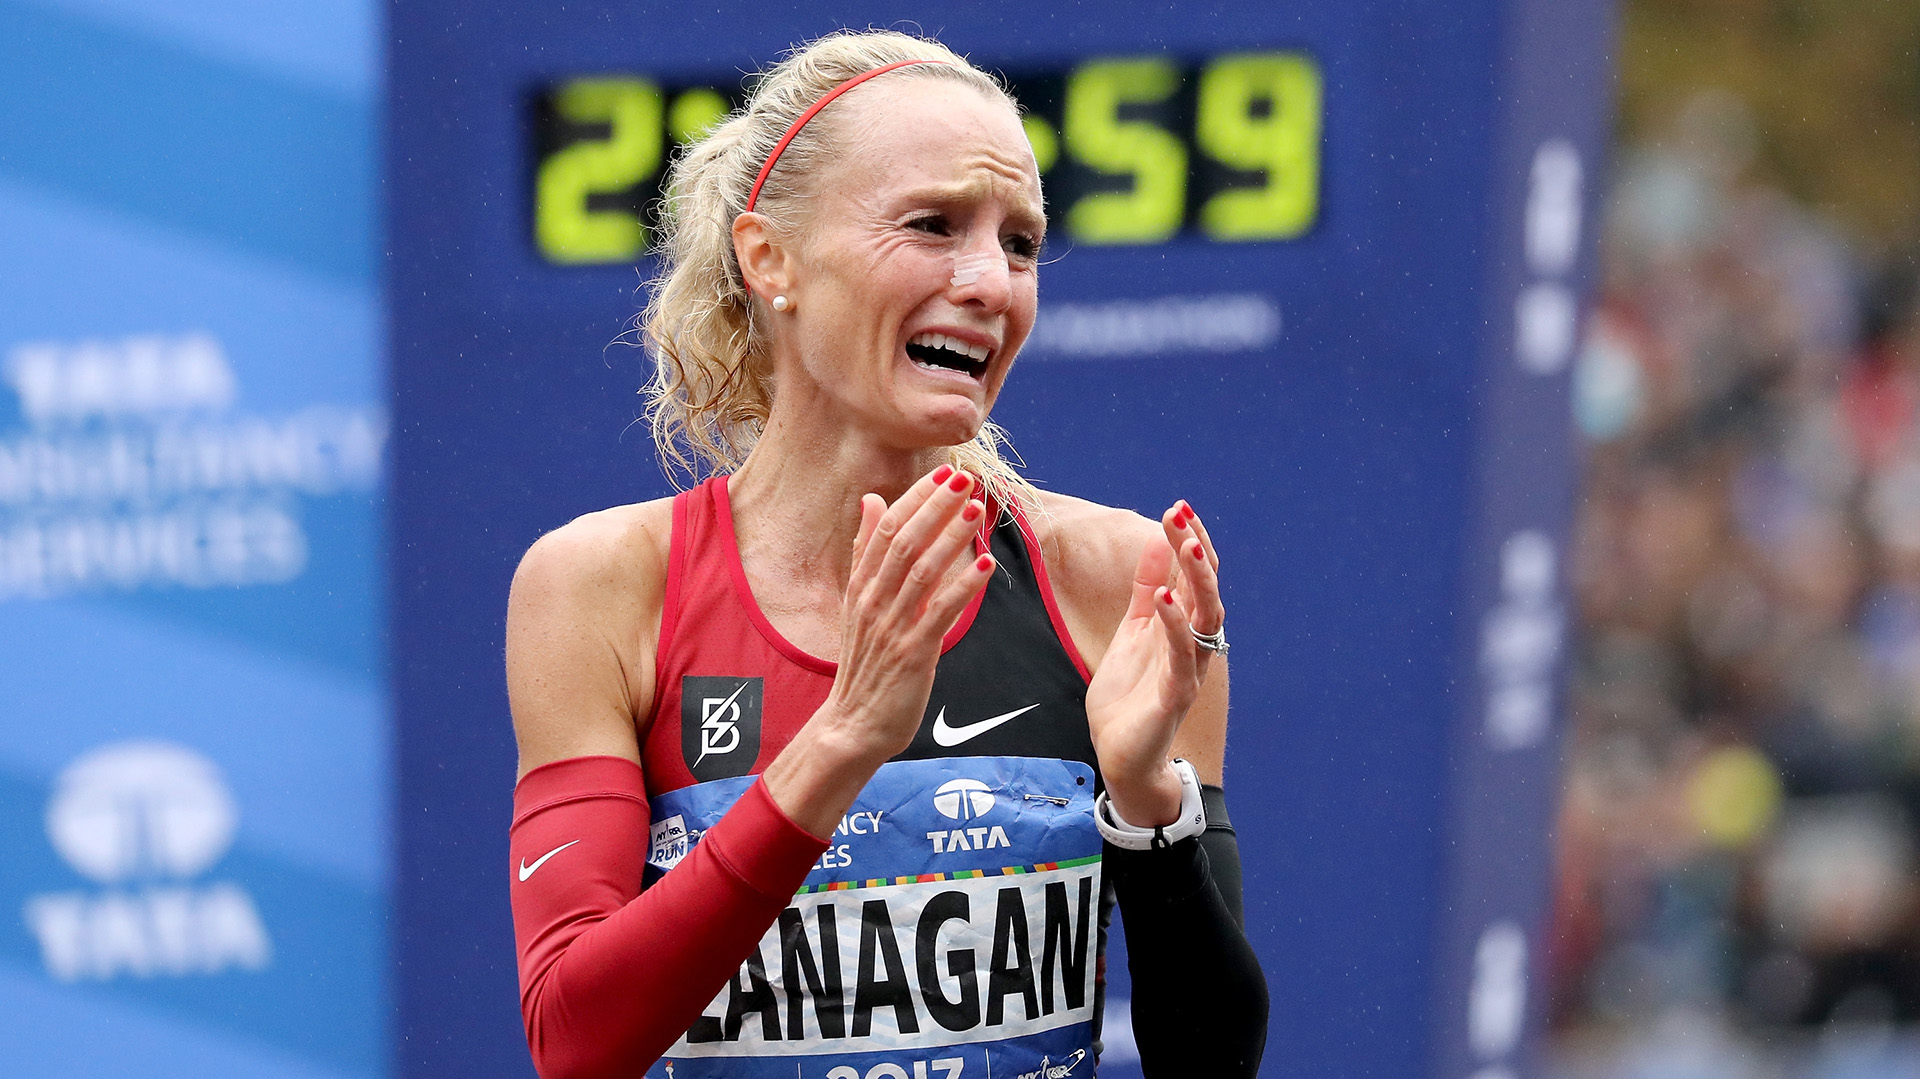 NEW YORK, NY - NOVEMBER 05: Shalane Flanagan of the United States celebrates winning the Professional Women's Division during the 2017 TCS New York City Marathon in Central Park on November 5, 2017 in New York City. (Photo by Elsa/Getty Images)